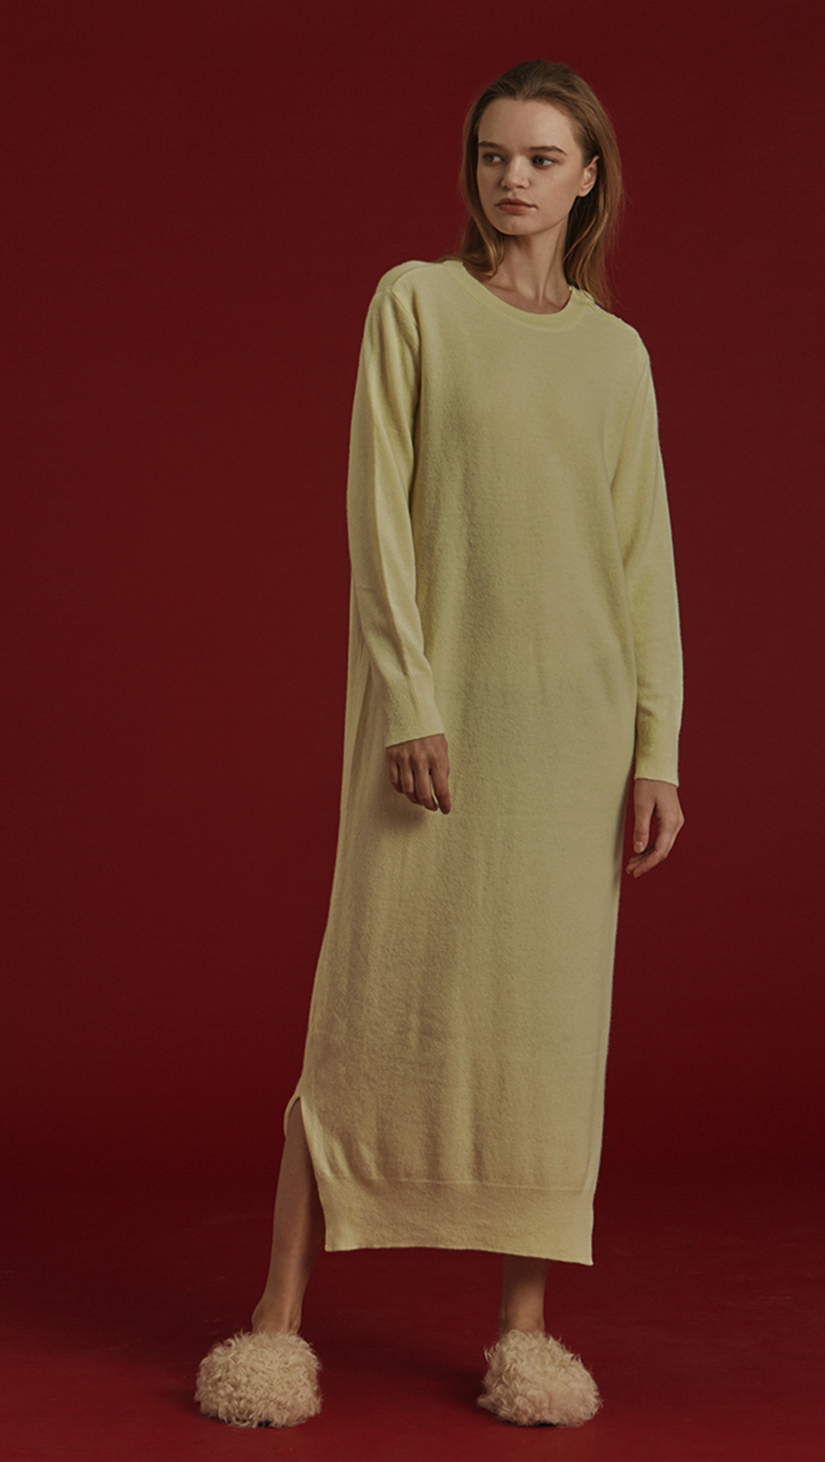 Latt Knit Dress in lime-yellow, with a stretch super soft wool. Button detailing along neckline. Pull on. Designed to be loose fit. Extra long in length.